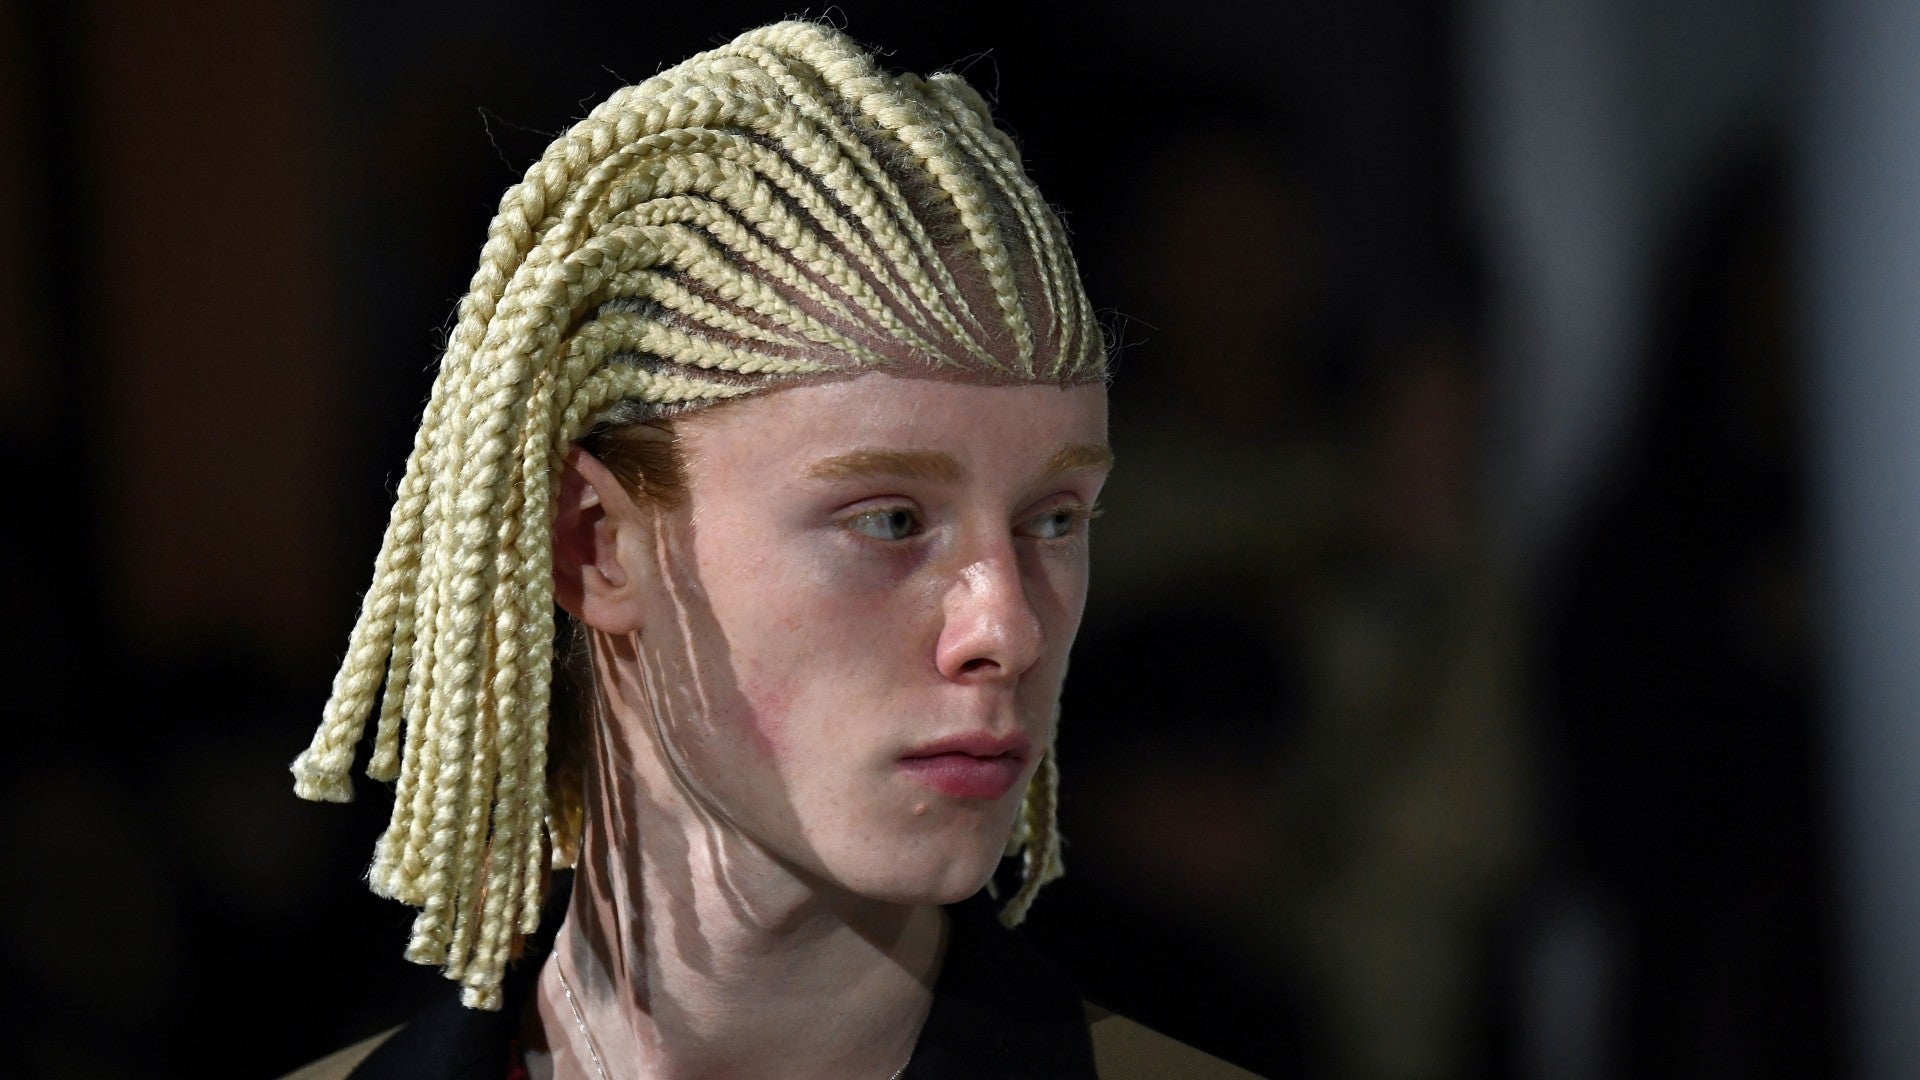 The Wigs At Comme des Garçons Weren’t Appropriation, But They’re Still Problematic